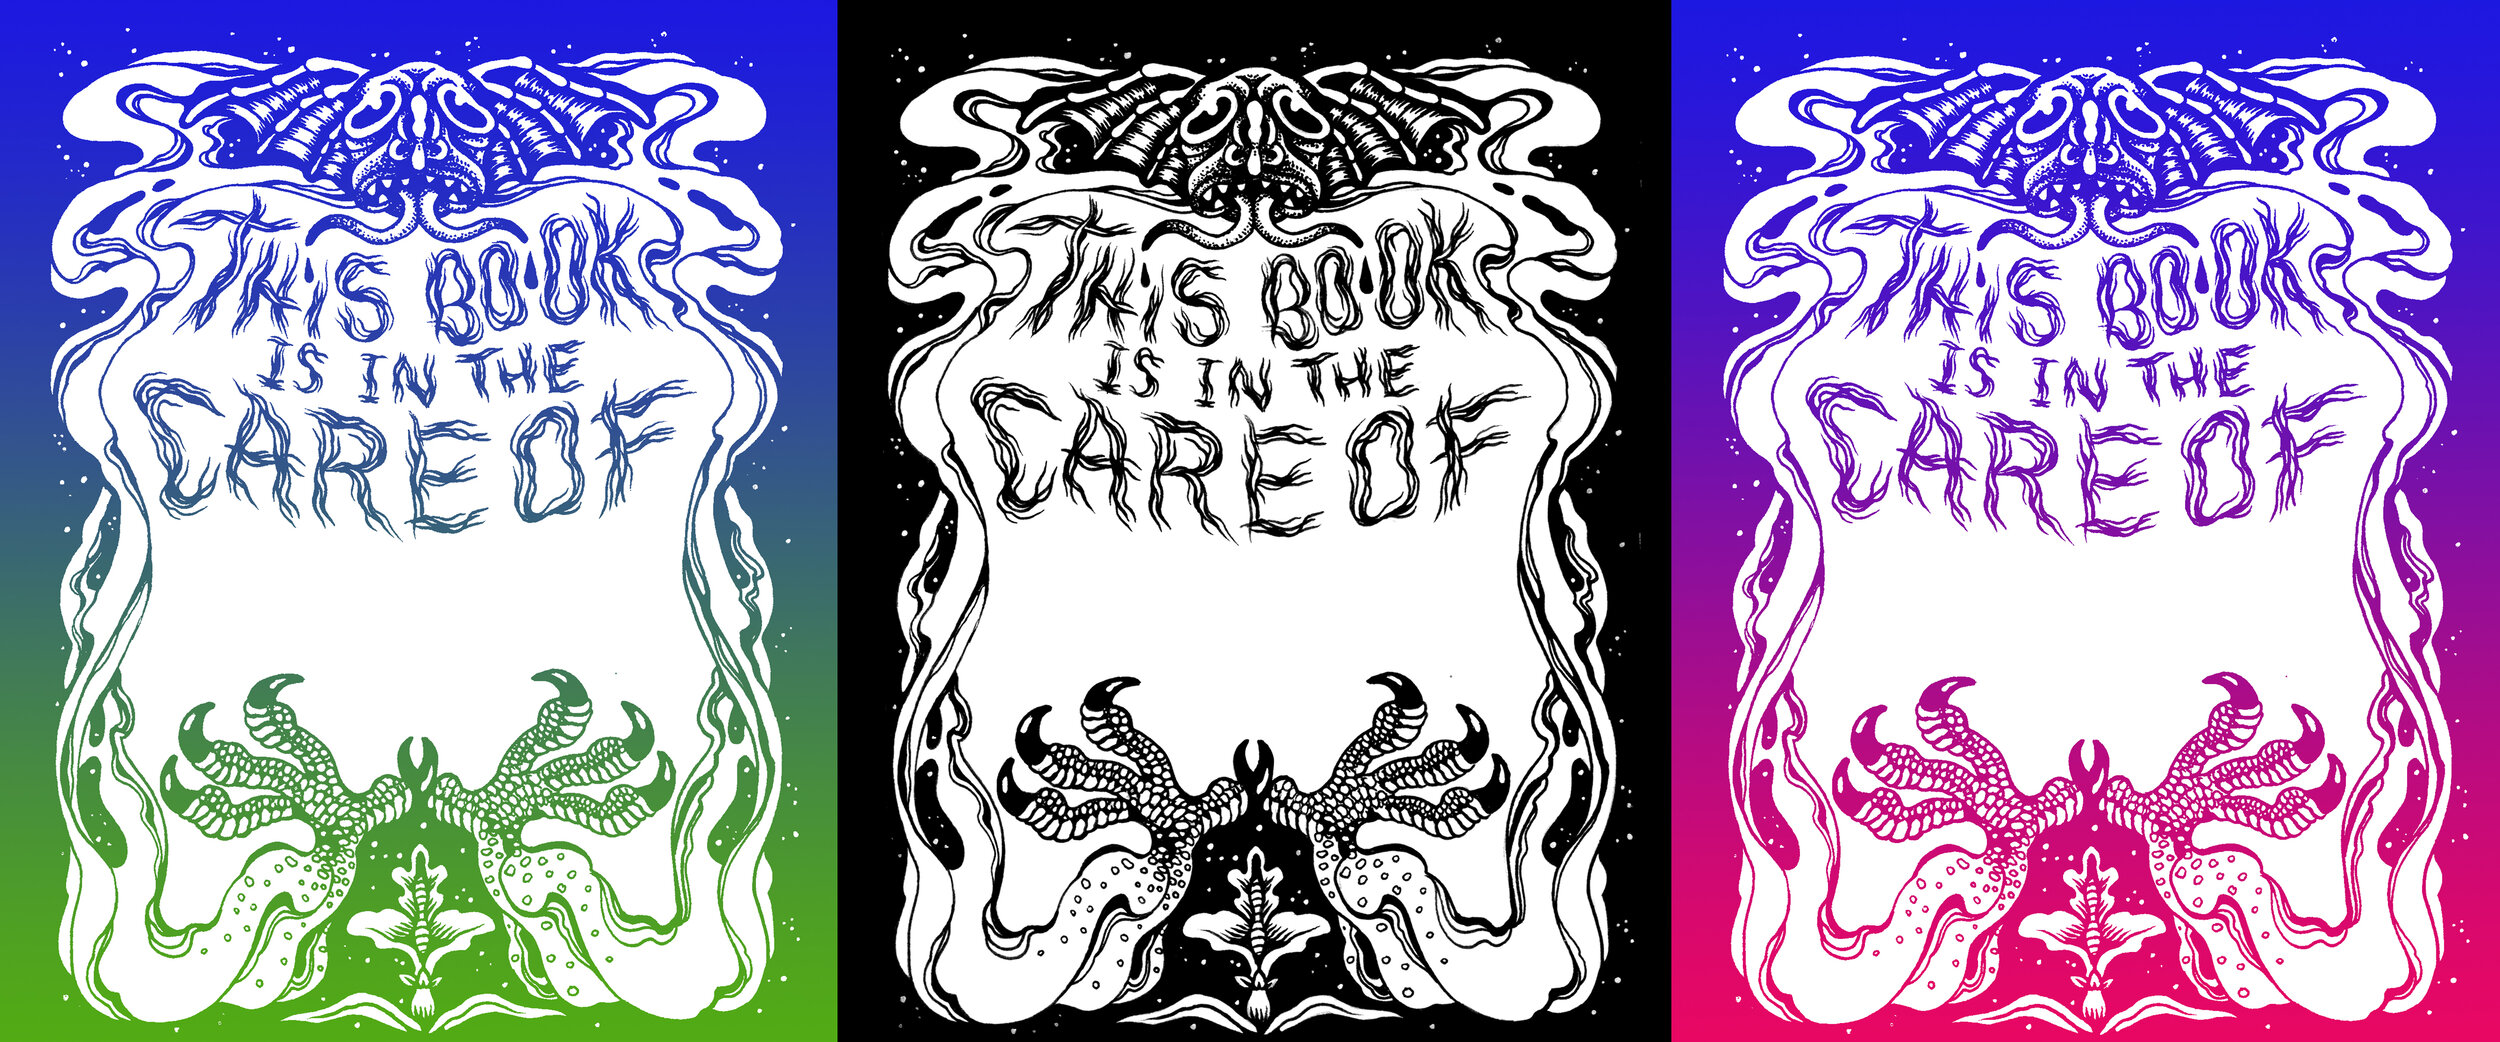 Bookplates for download!